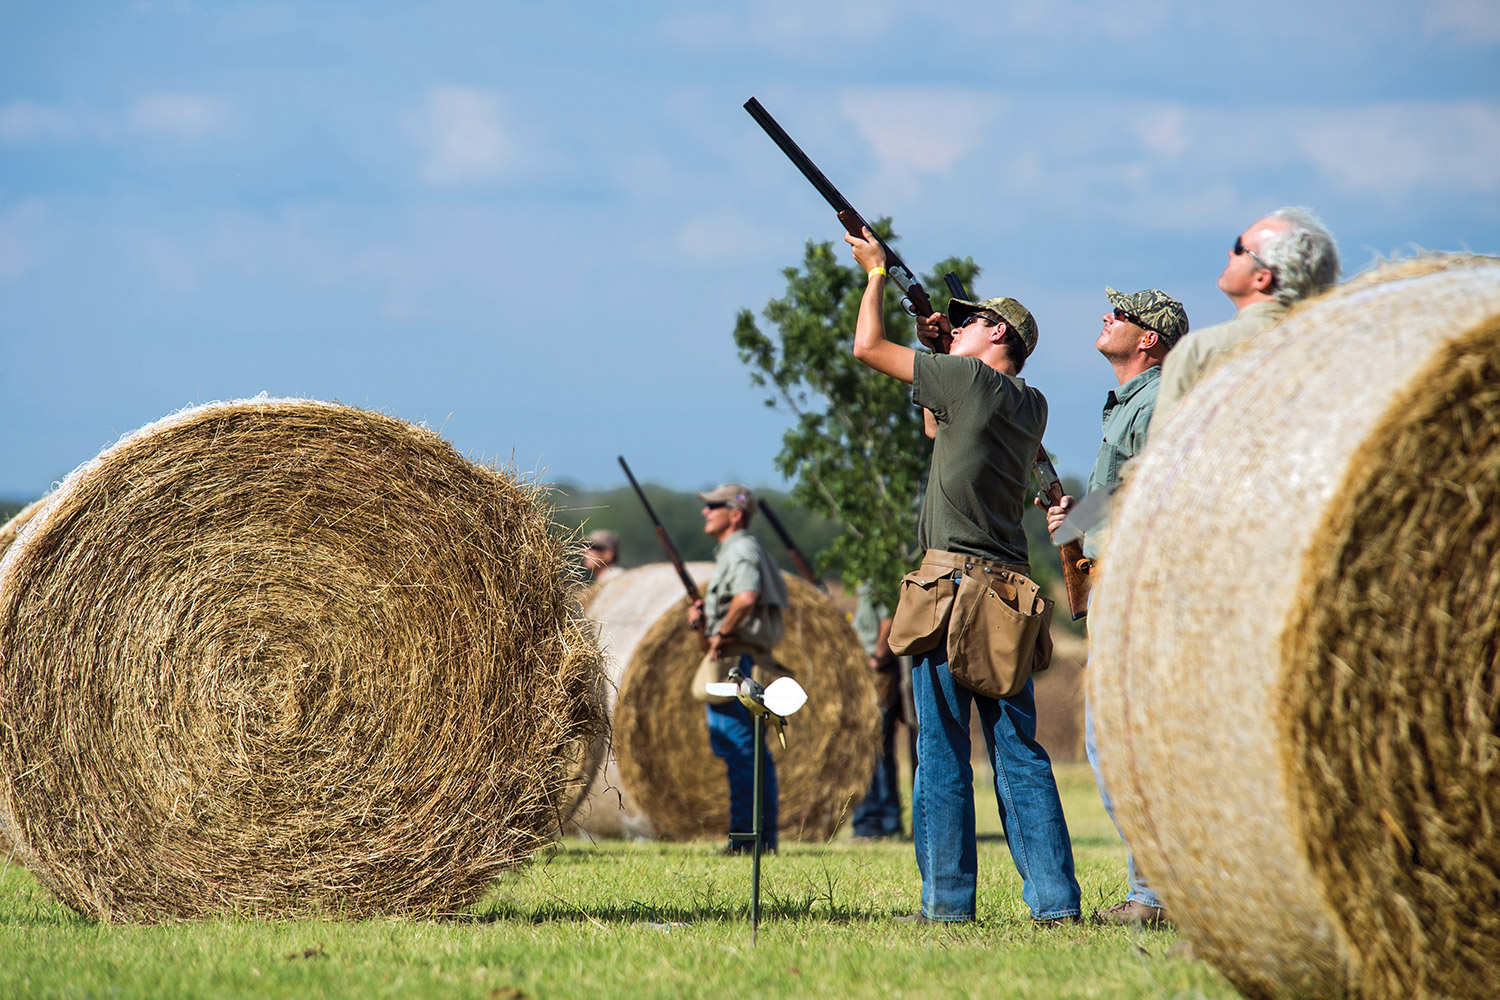 Dover hunter shoots from station behind rolled hay bale as others watch.